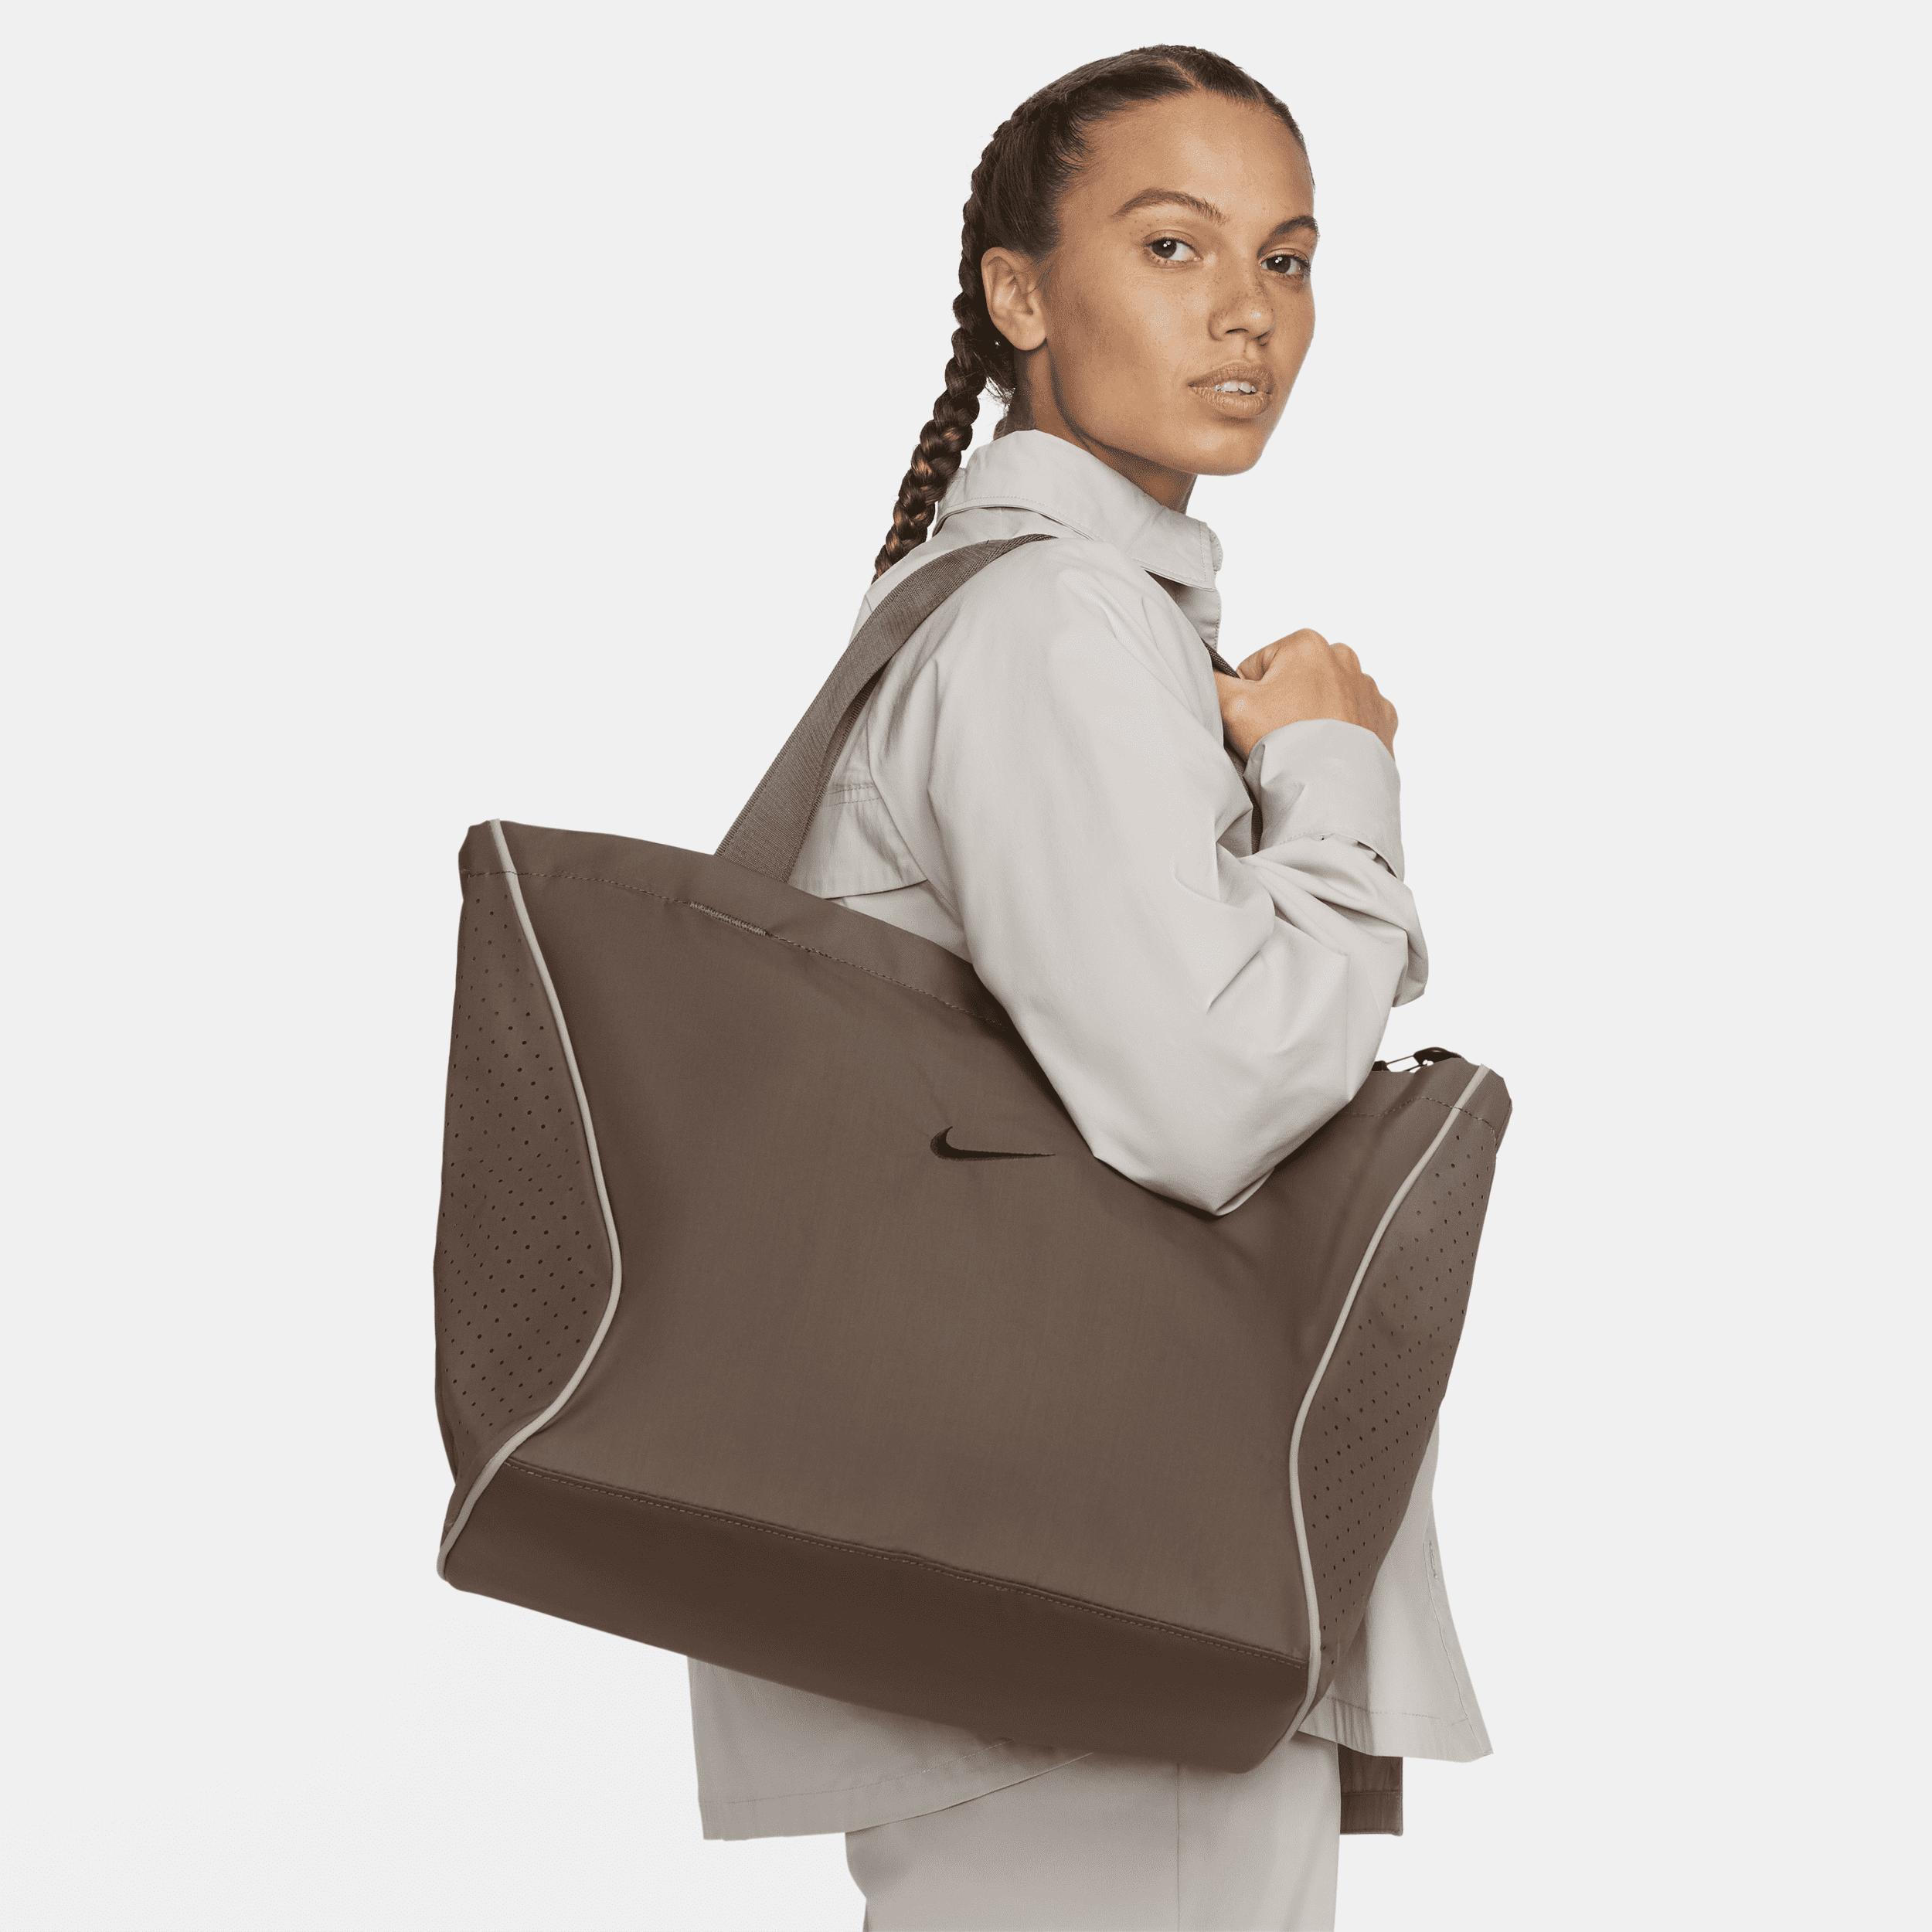 Nike Everyday Tote Bags